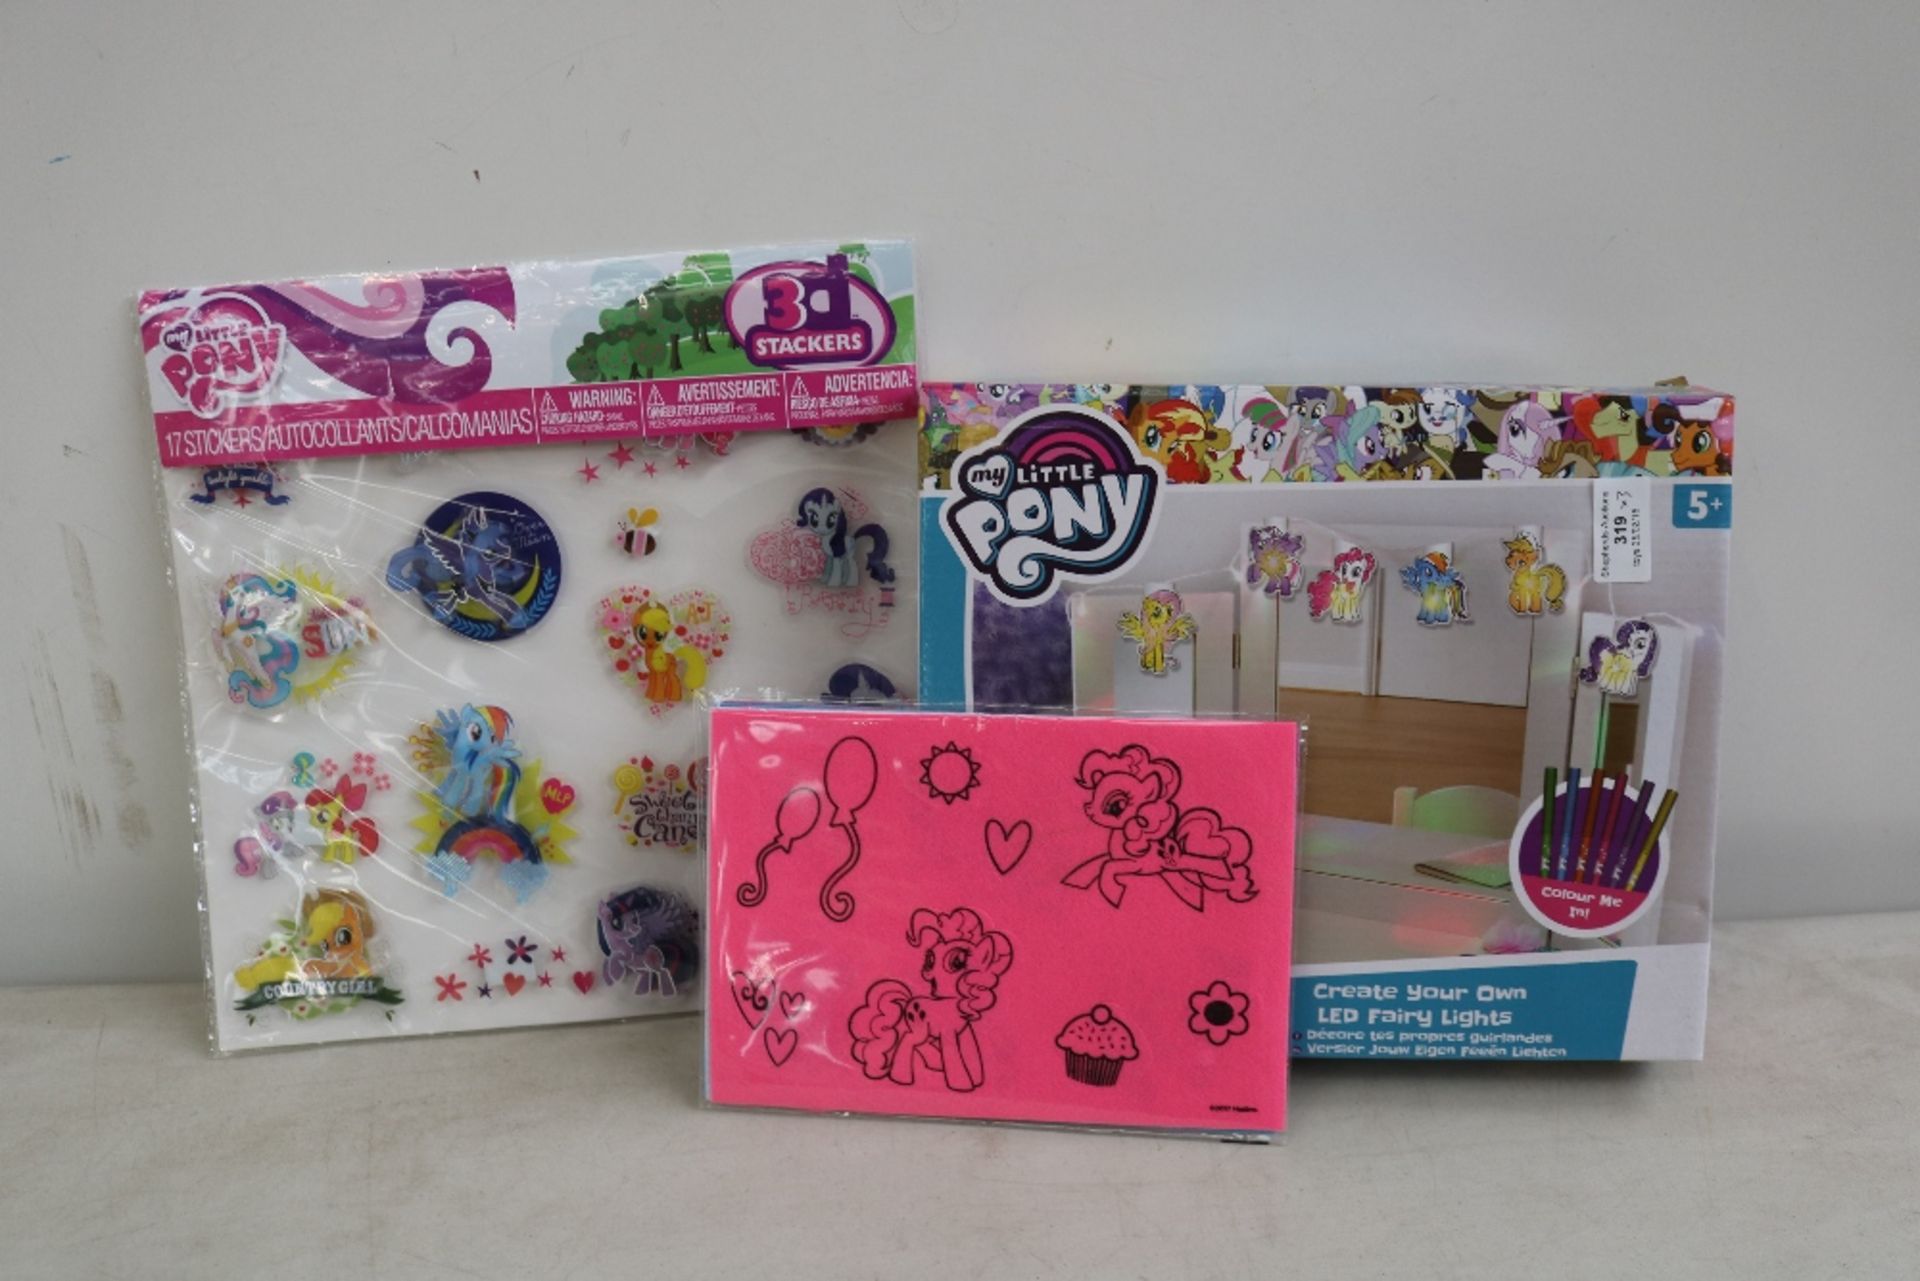 3x Items being.   - My Little Pony create your own LED fairy lights, new and boxed.  - My Little